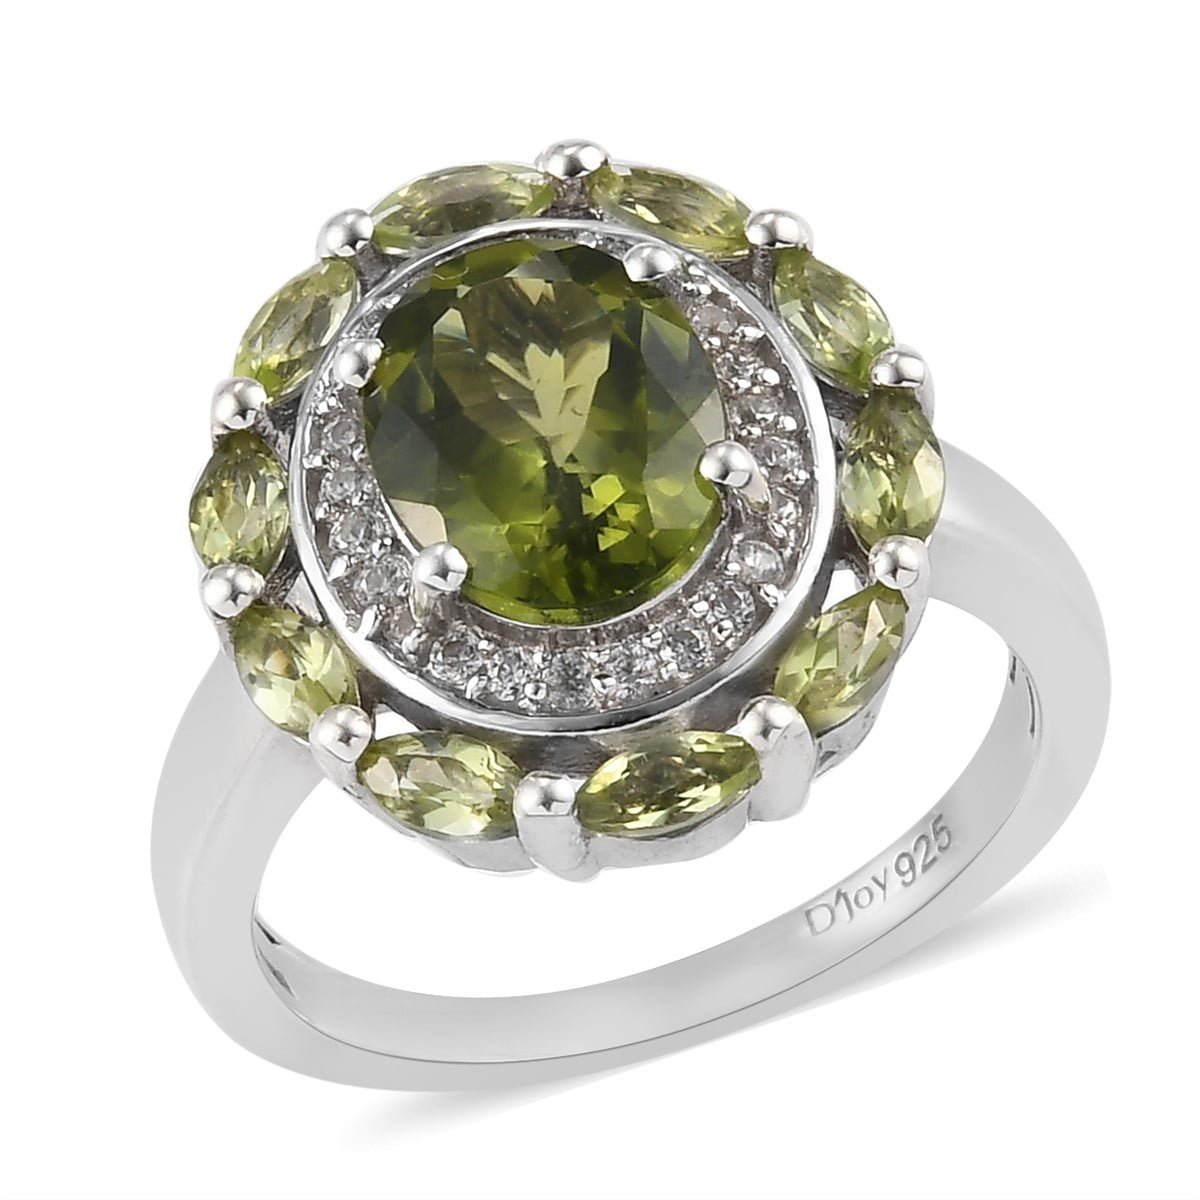 happiness size 4.5 one of a kind ring 6mm peridot one of a kind sterling silver stamped